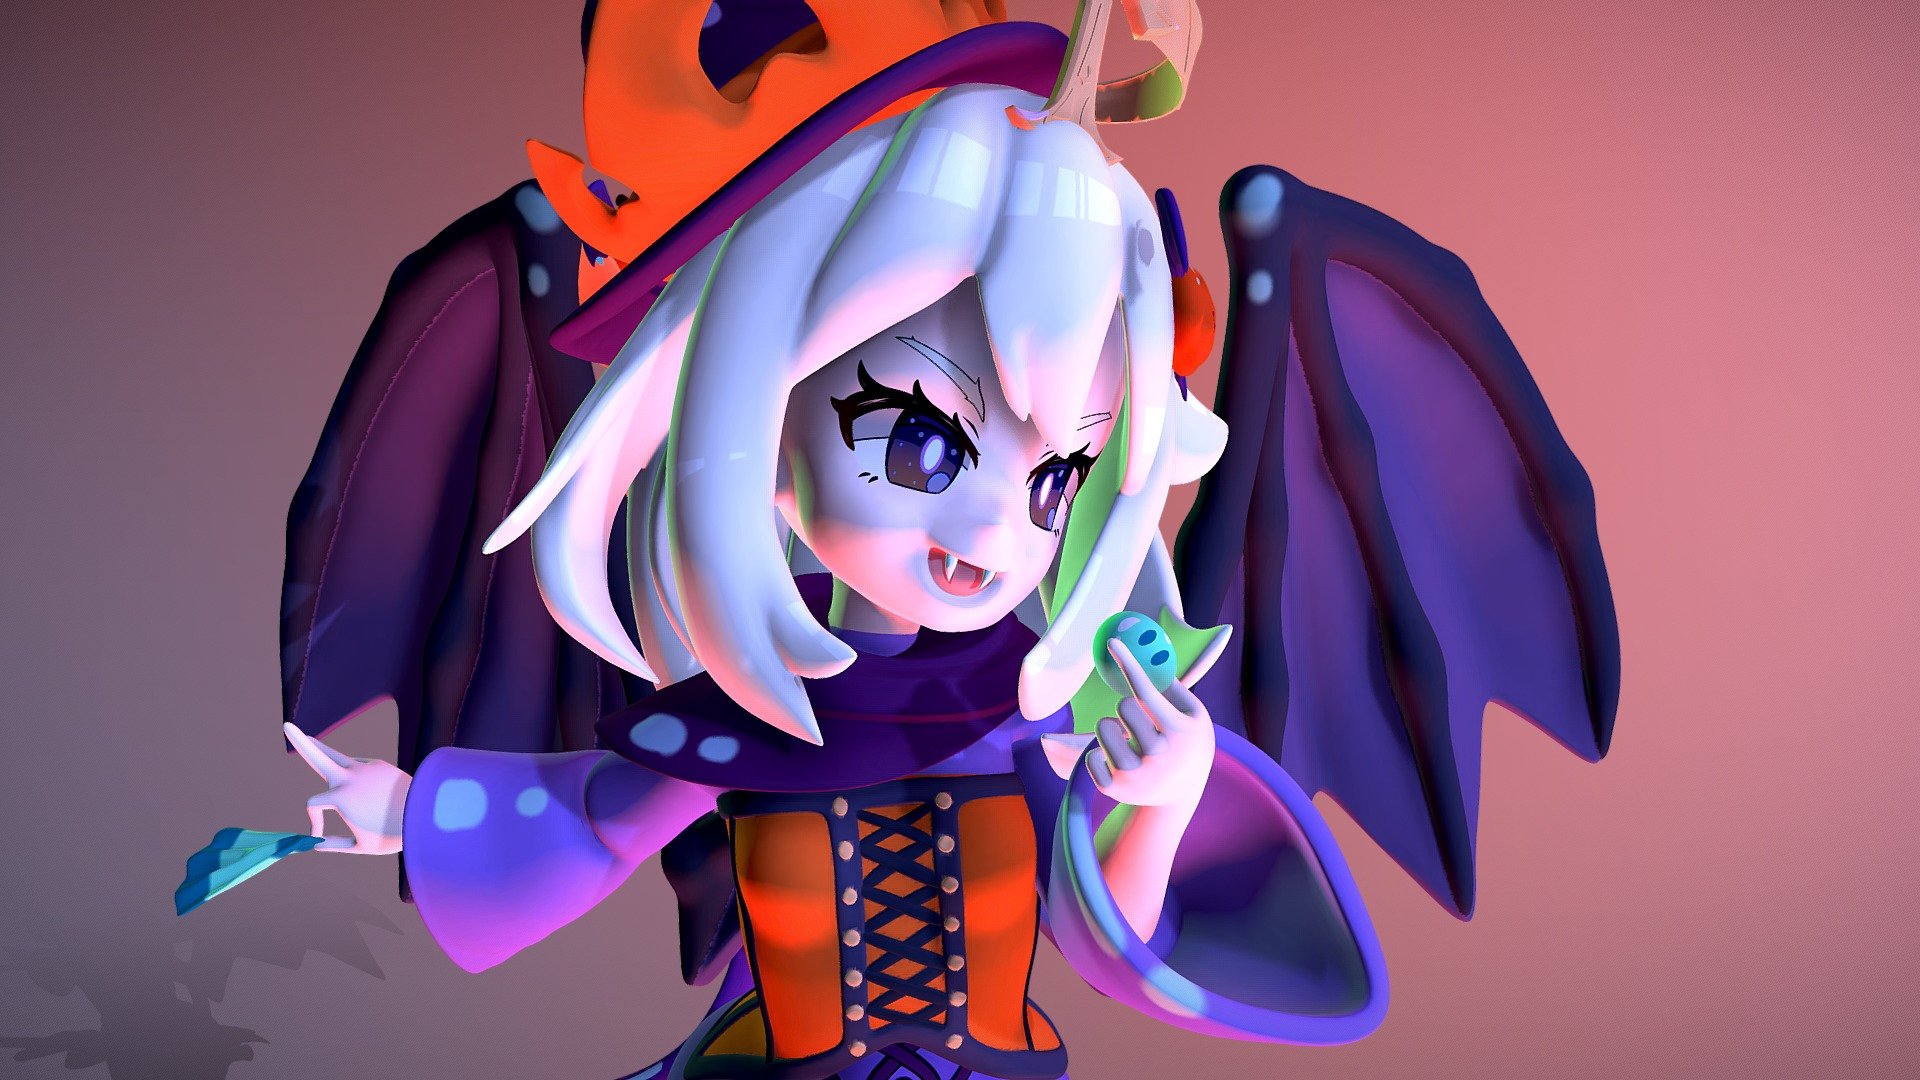 I've made another figurine, this time featuring fairy Paimon from Genshin Impact! This is my entry for their Halloween art contest. Took me around 40 hours to make.


Interested and want to see more of my models (and drawings)? Or want to watch me VTuber stream art and game? Follow me on Twitter, Twitch and Pixiv!

Twitter account: https://twitter.com/MableArts

Pixiv account:https://www.pixiv.net/en/users/57485002

Twitch Account: https://www.twitch.tv/maybelline_naoko - Halloween Paimon - Genshin Impact [Figurine] - 3D model by MableArts尚子 (@MableArts) 3d model